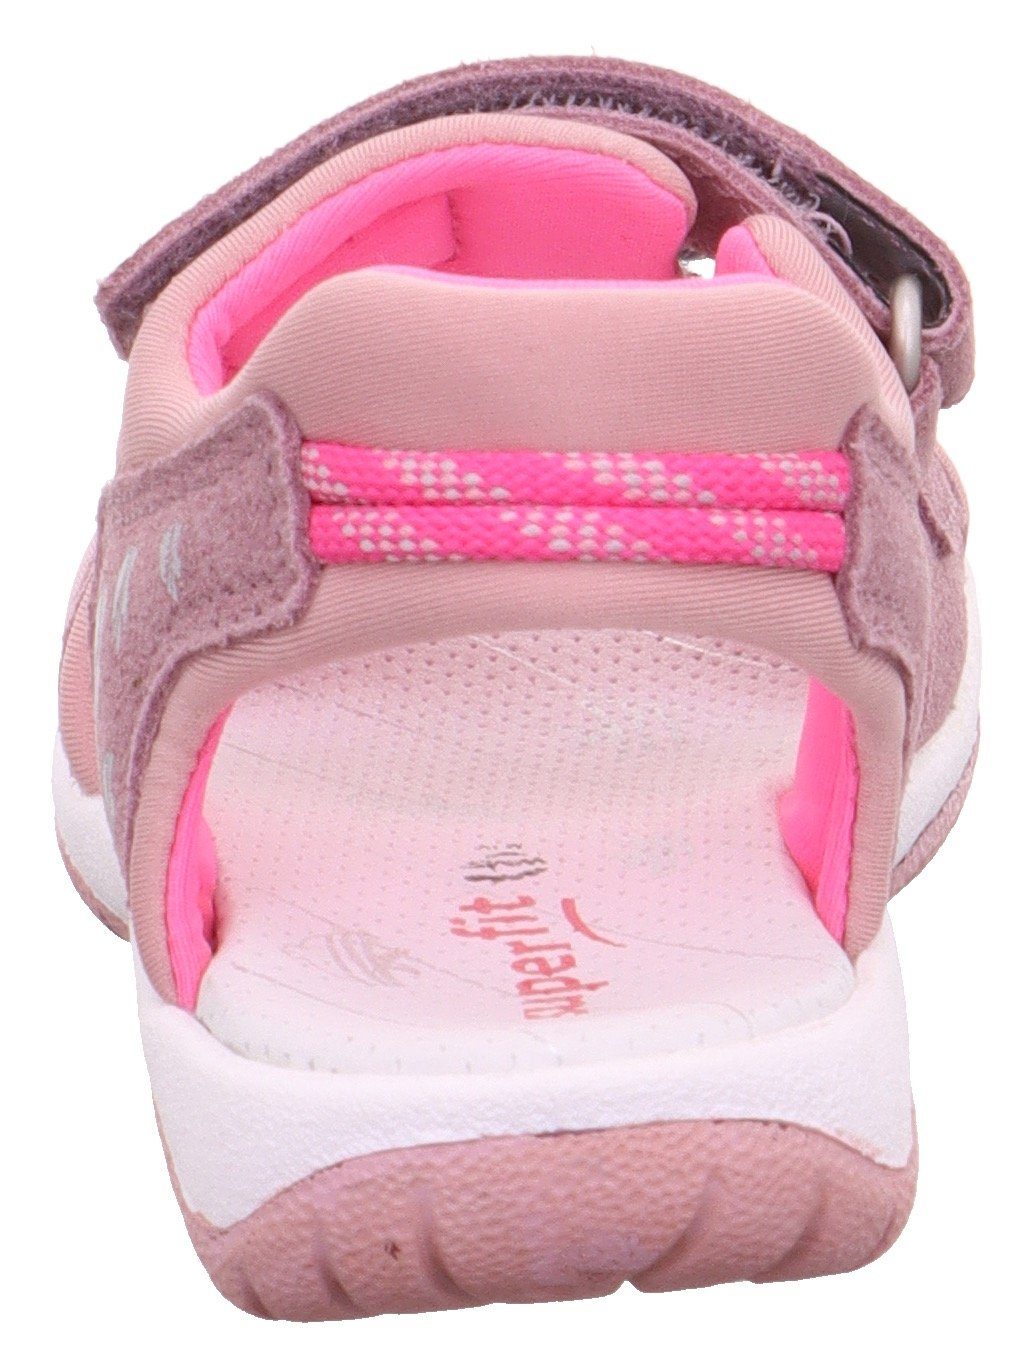 (20401955) Sandale Mix Superfit LILA/PINK Mittel SUNNY im WMS: Material